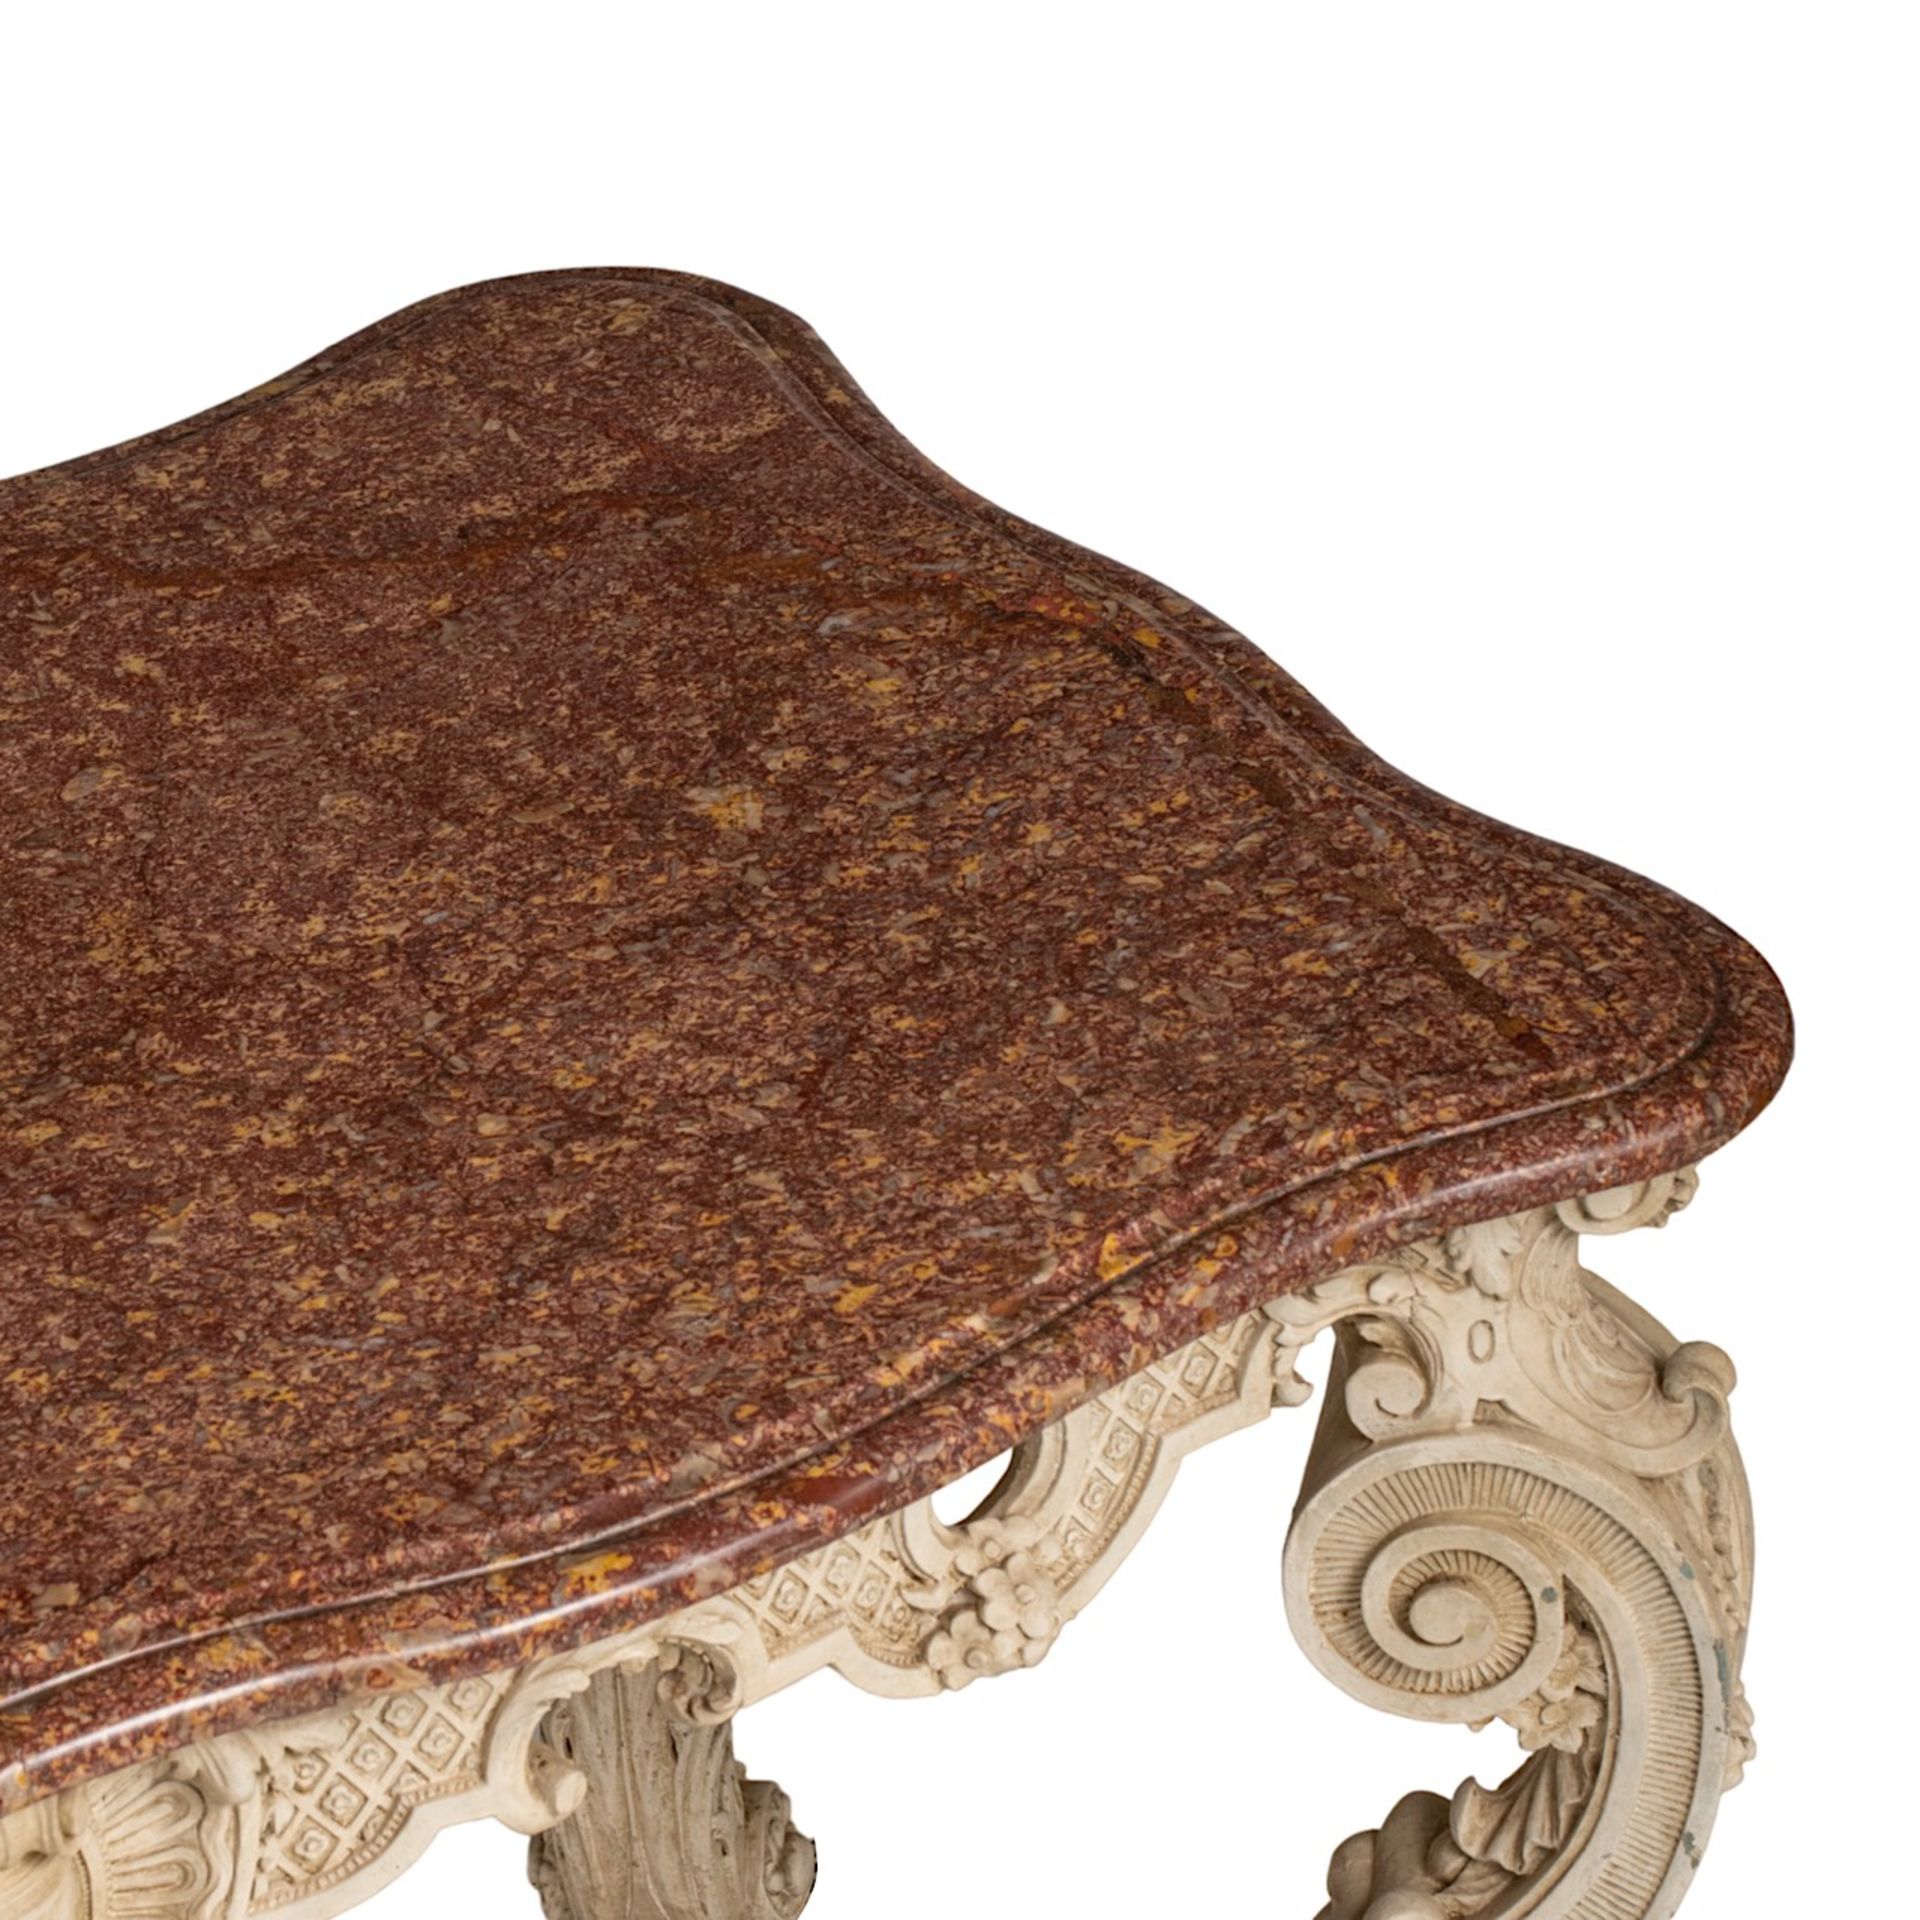 An imposing Louis XIV-style 'console de milieu' with a brocatelle marble, 19thC, H 81,5 - W 147 - D - Image 7 of 11